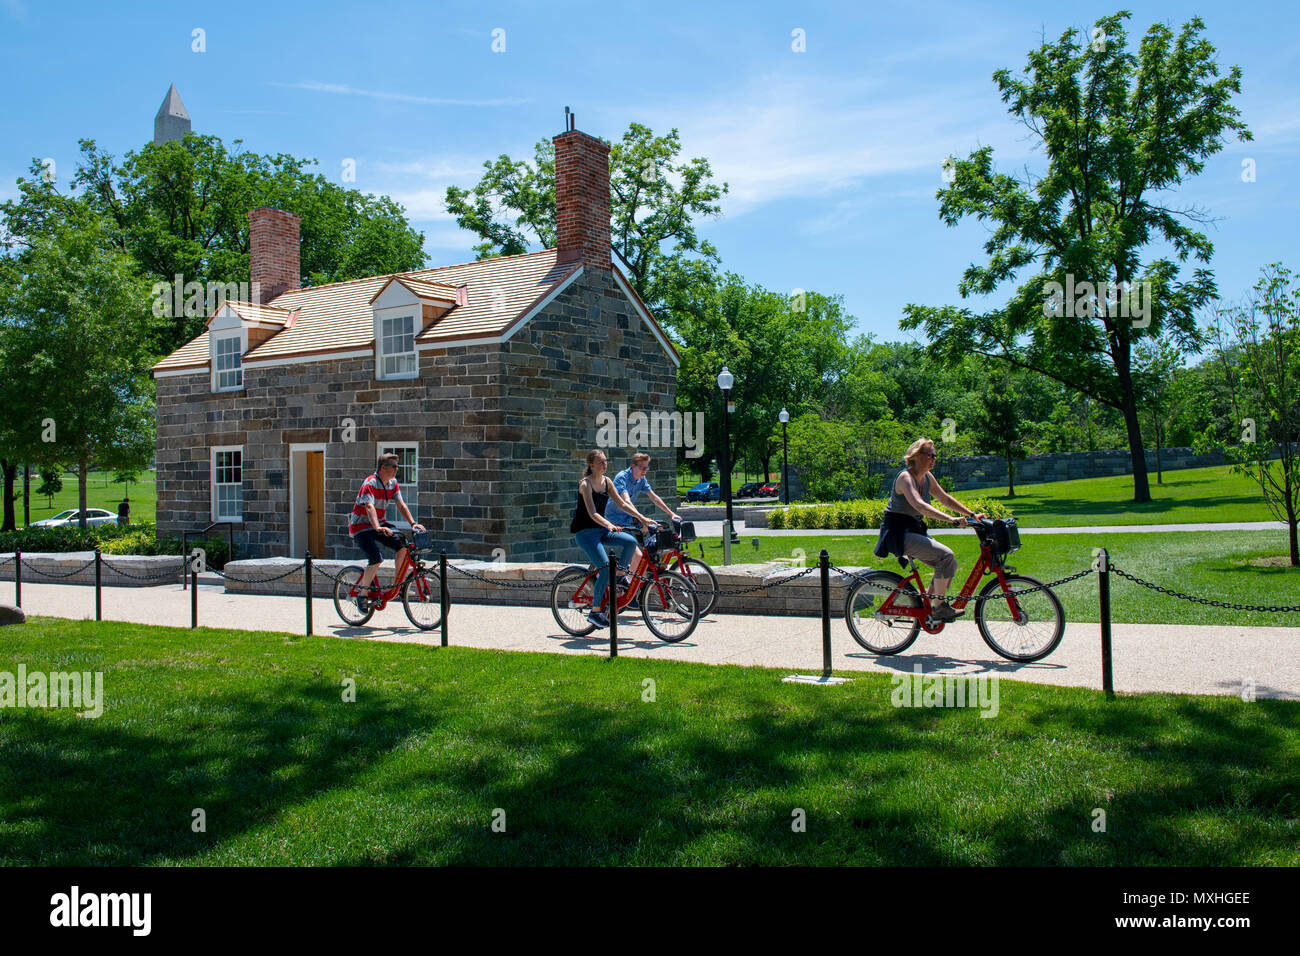 USA Washington DC Lock Keepers House on the National Mall in the Constitution Gardens Lockkeepers House restored Capitol Bike Share Stock Photo